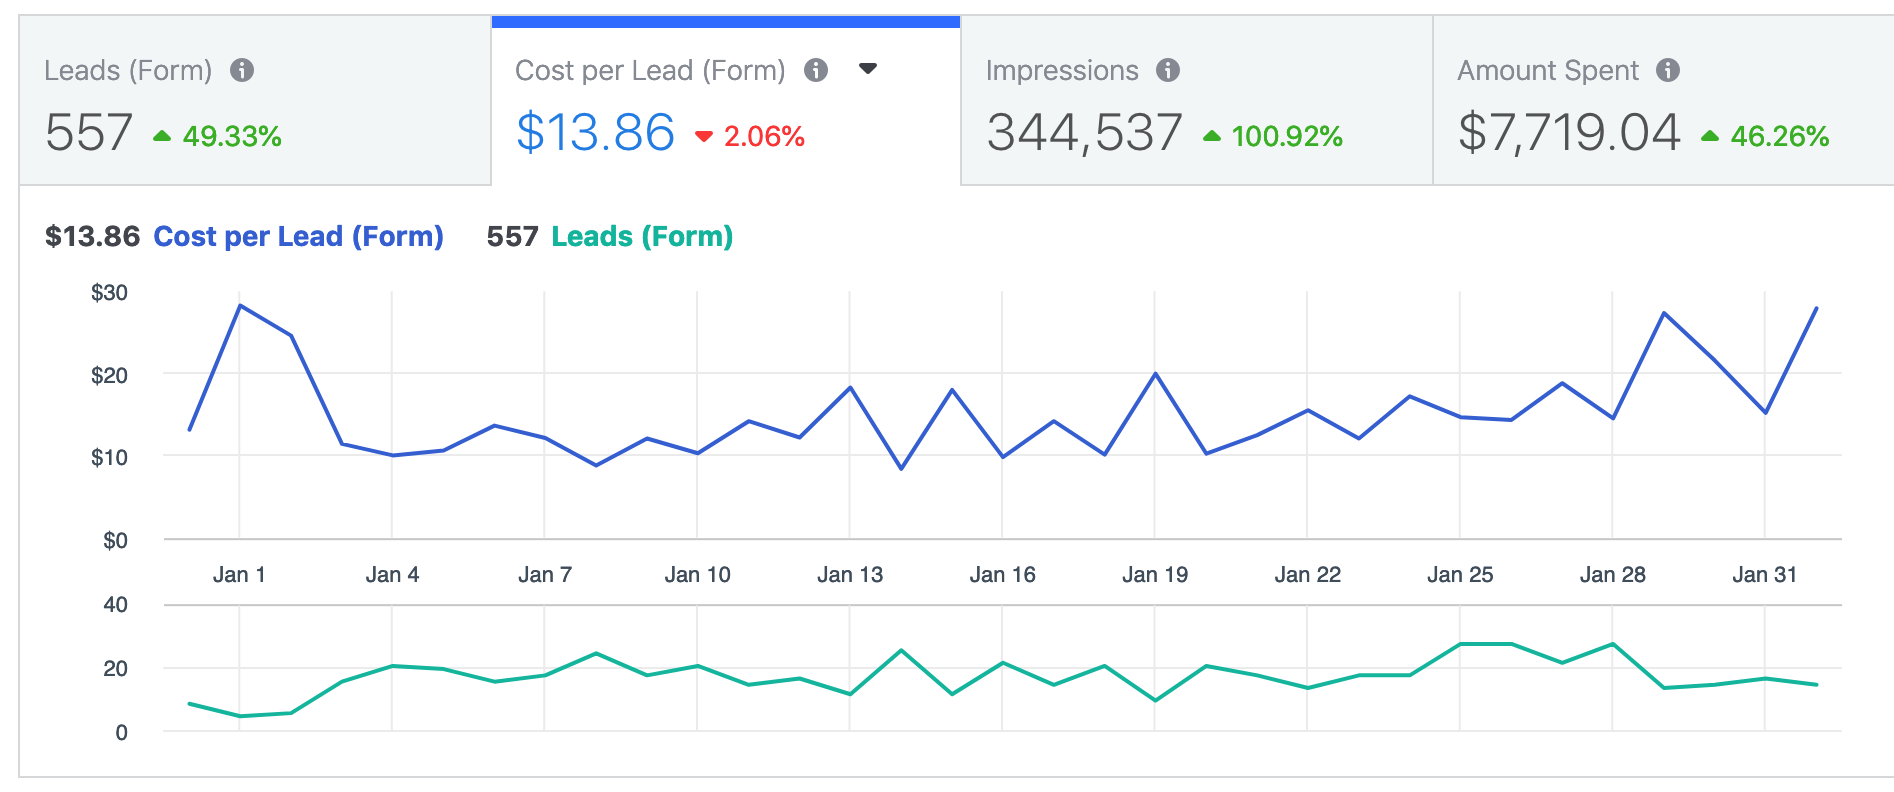 facebook graph of leads and cost per lead (form)